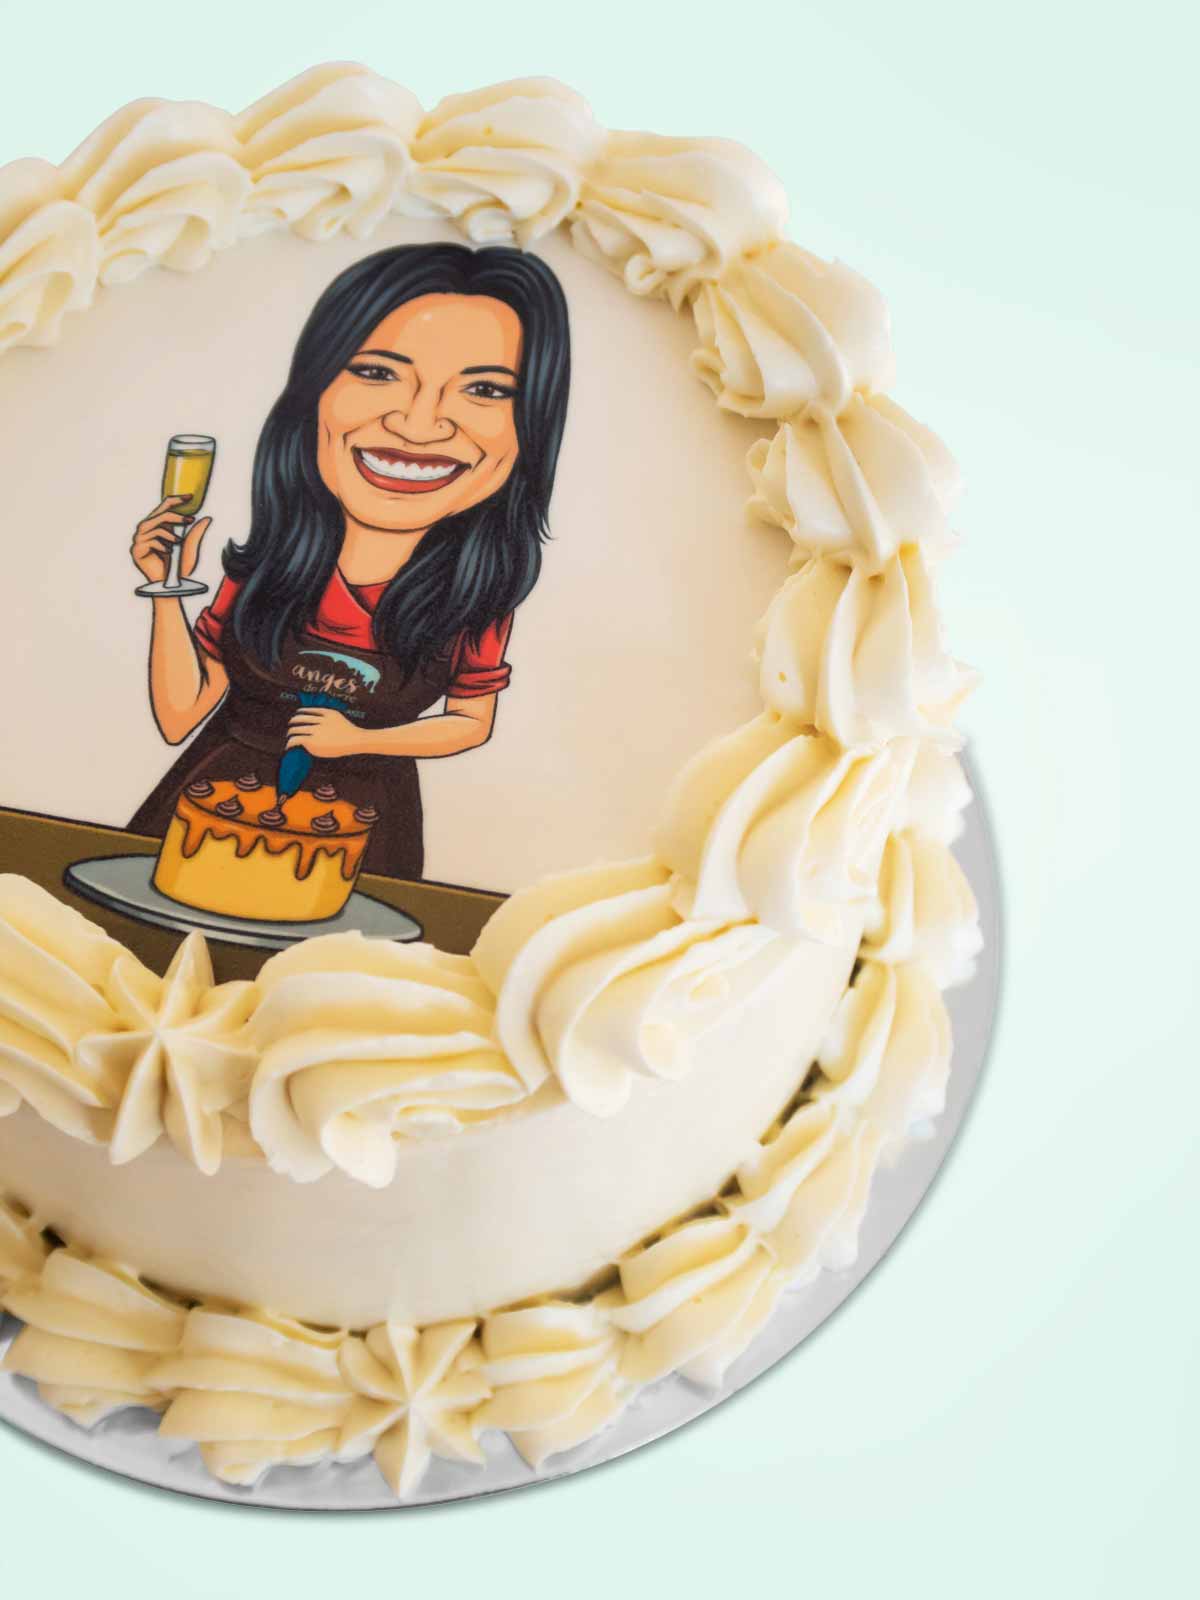 Personalised Caricature cake delivery London Surrey Berkshire